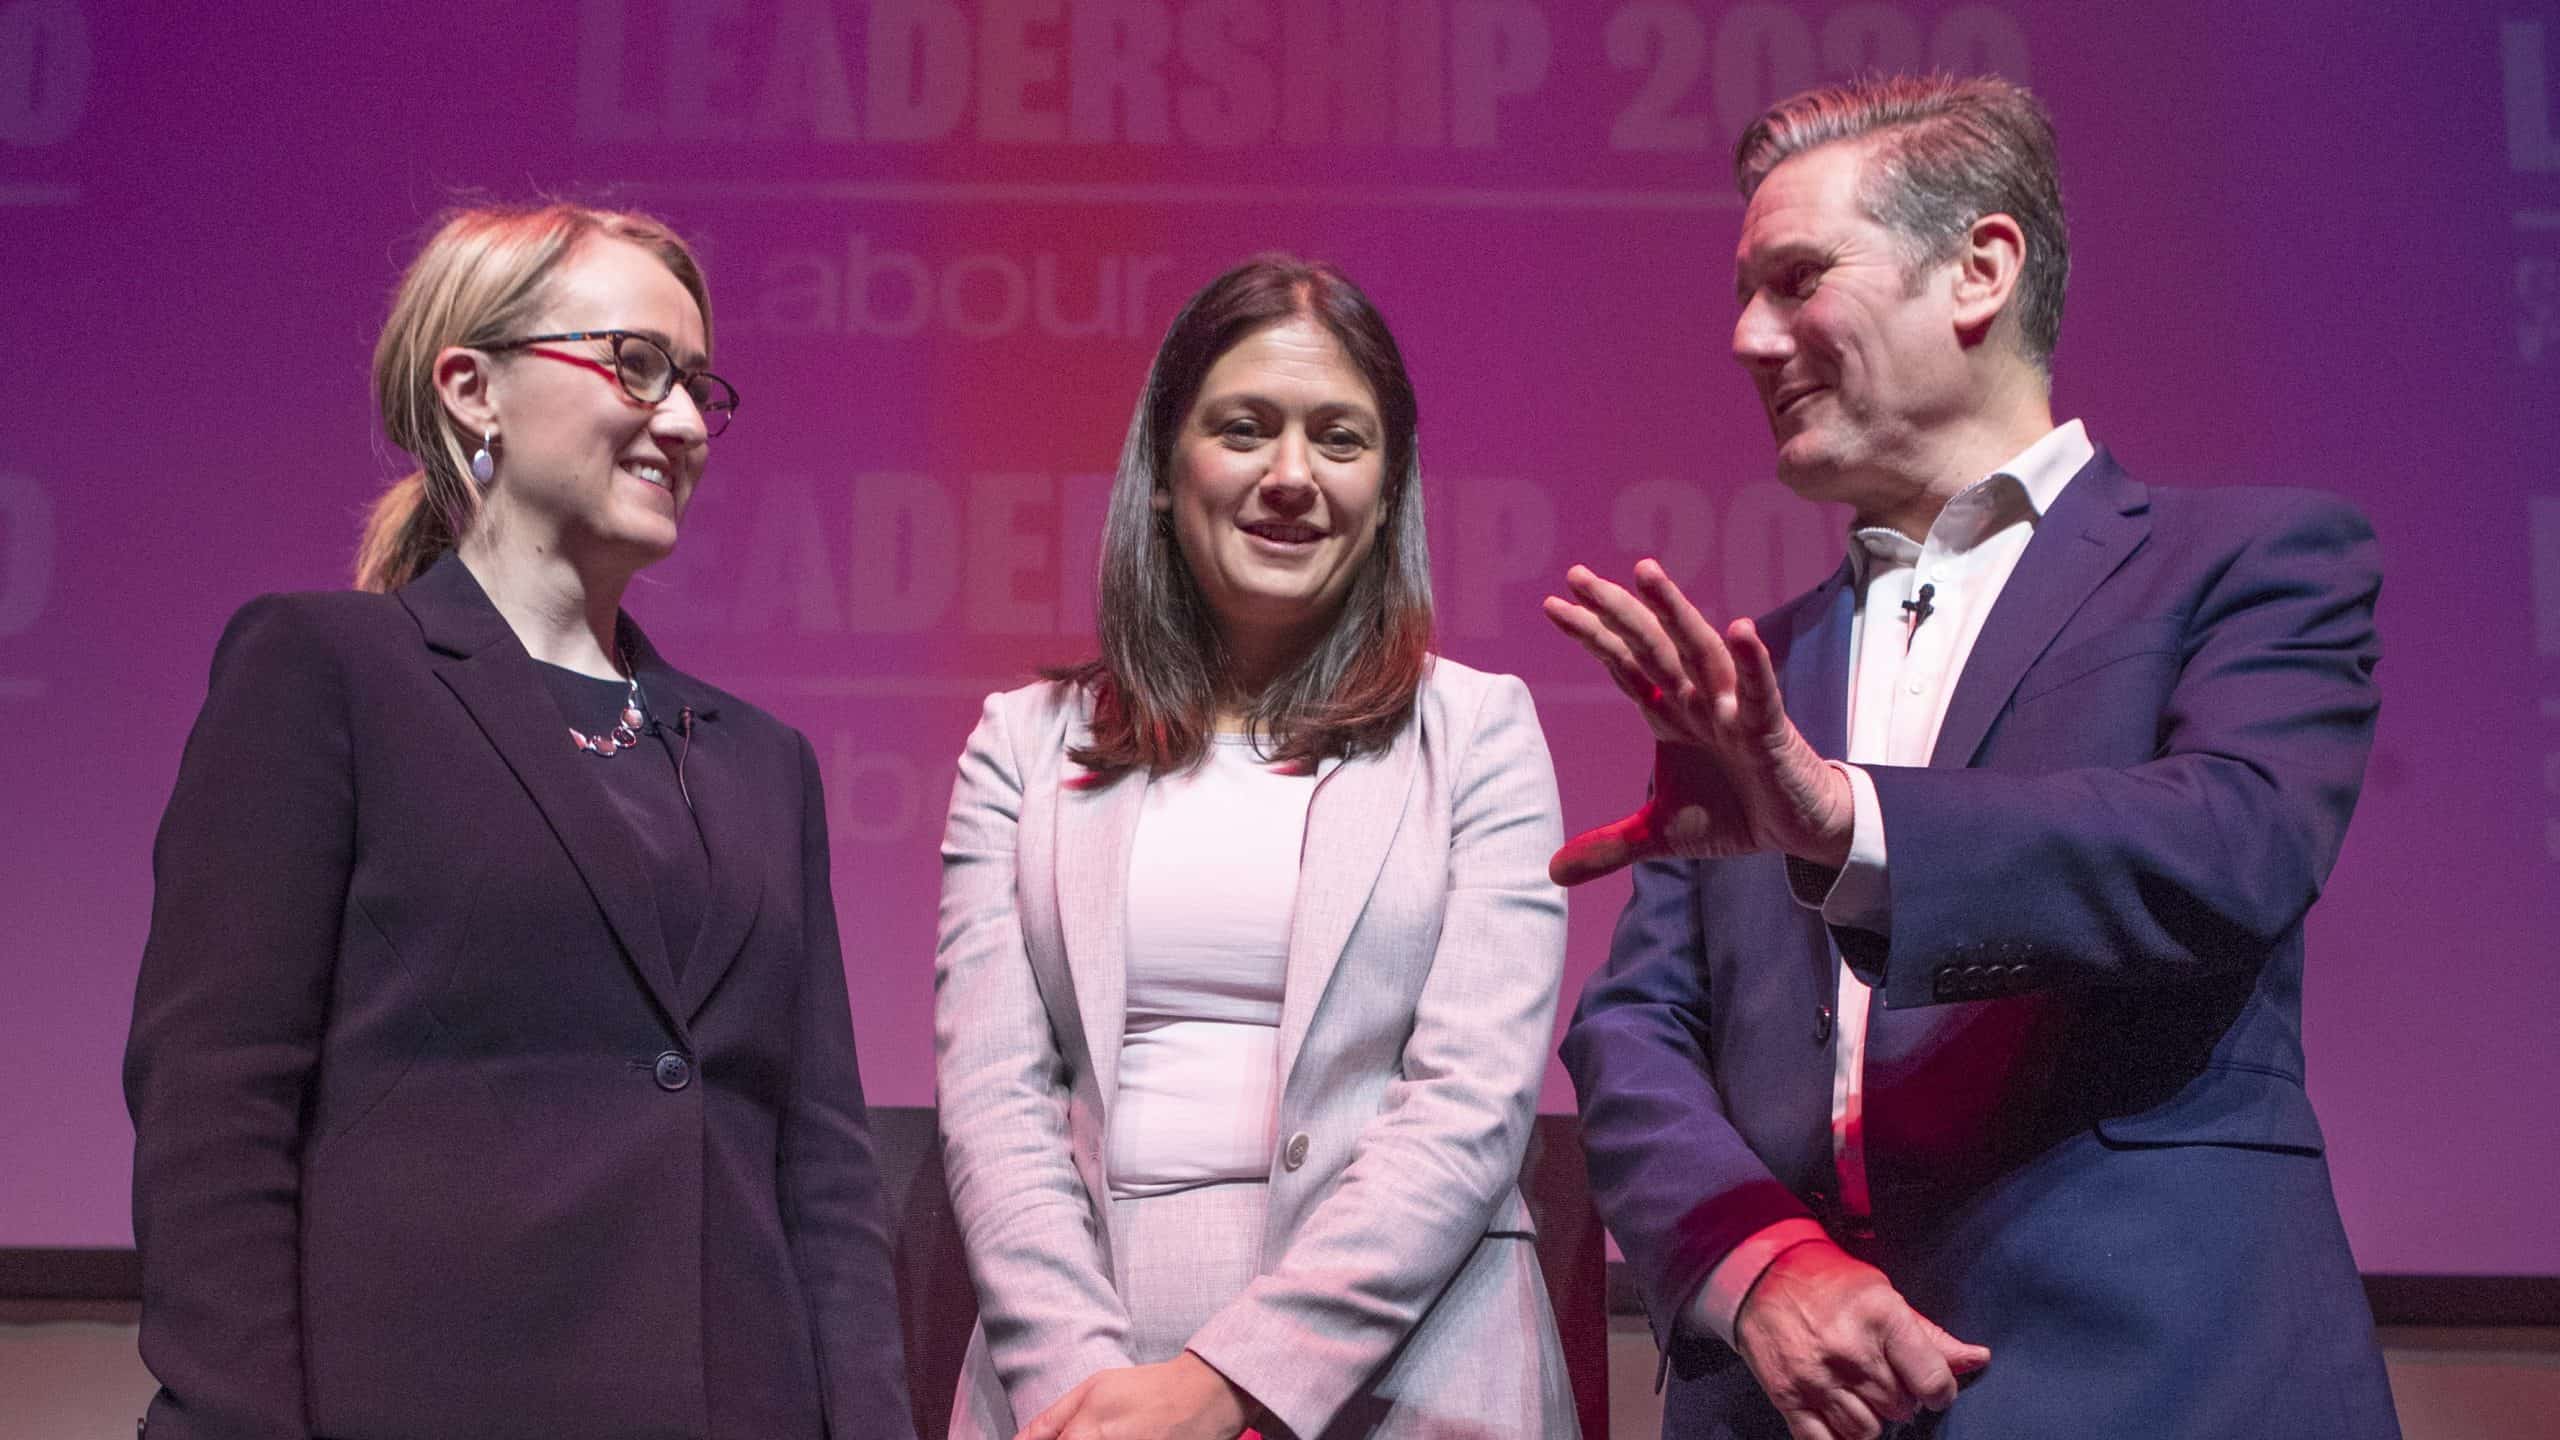 Labour leadership poll puts Starmer on track for win